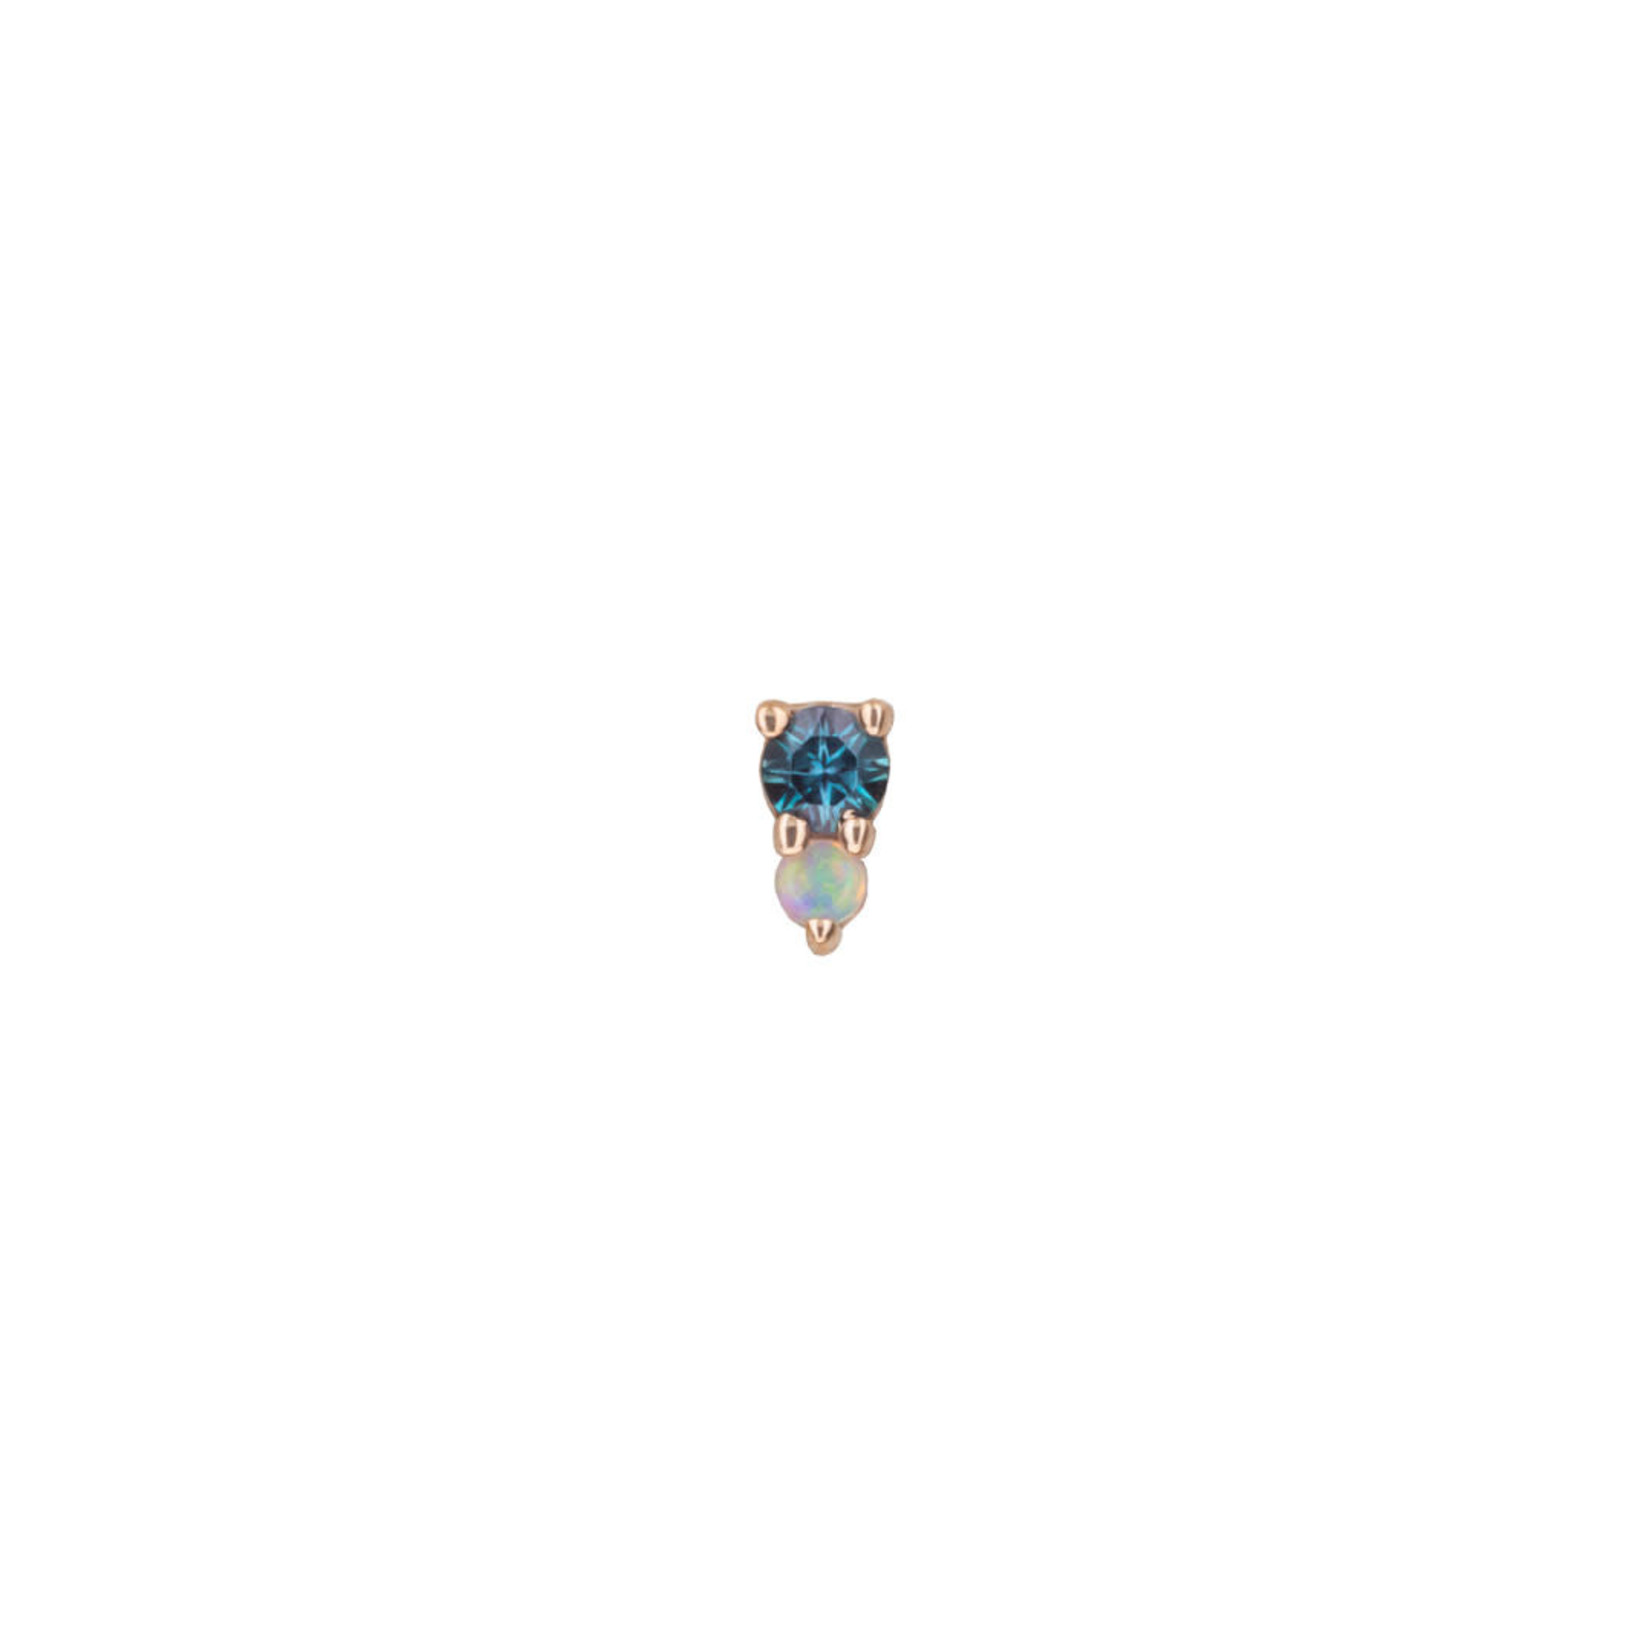 BVLA BVLA "Jeanie" 2 press fit end with 2.0 Alexandrite & 1.5 AAA white opal